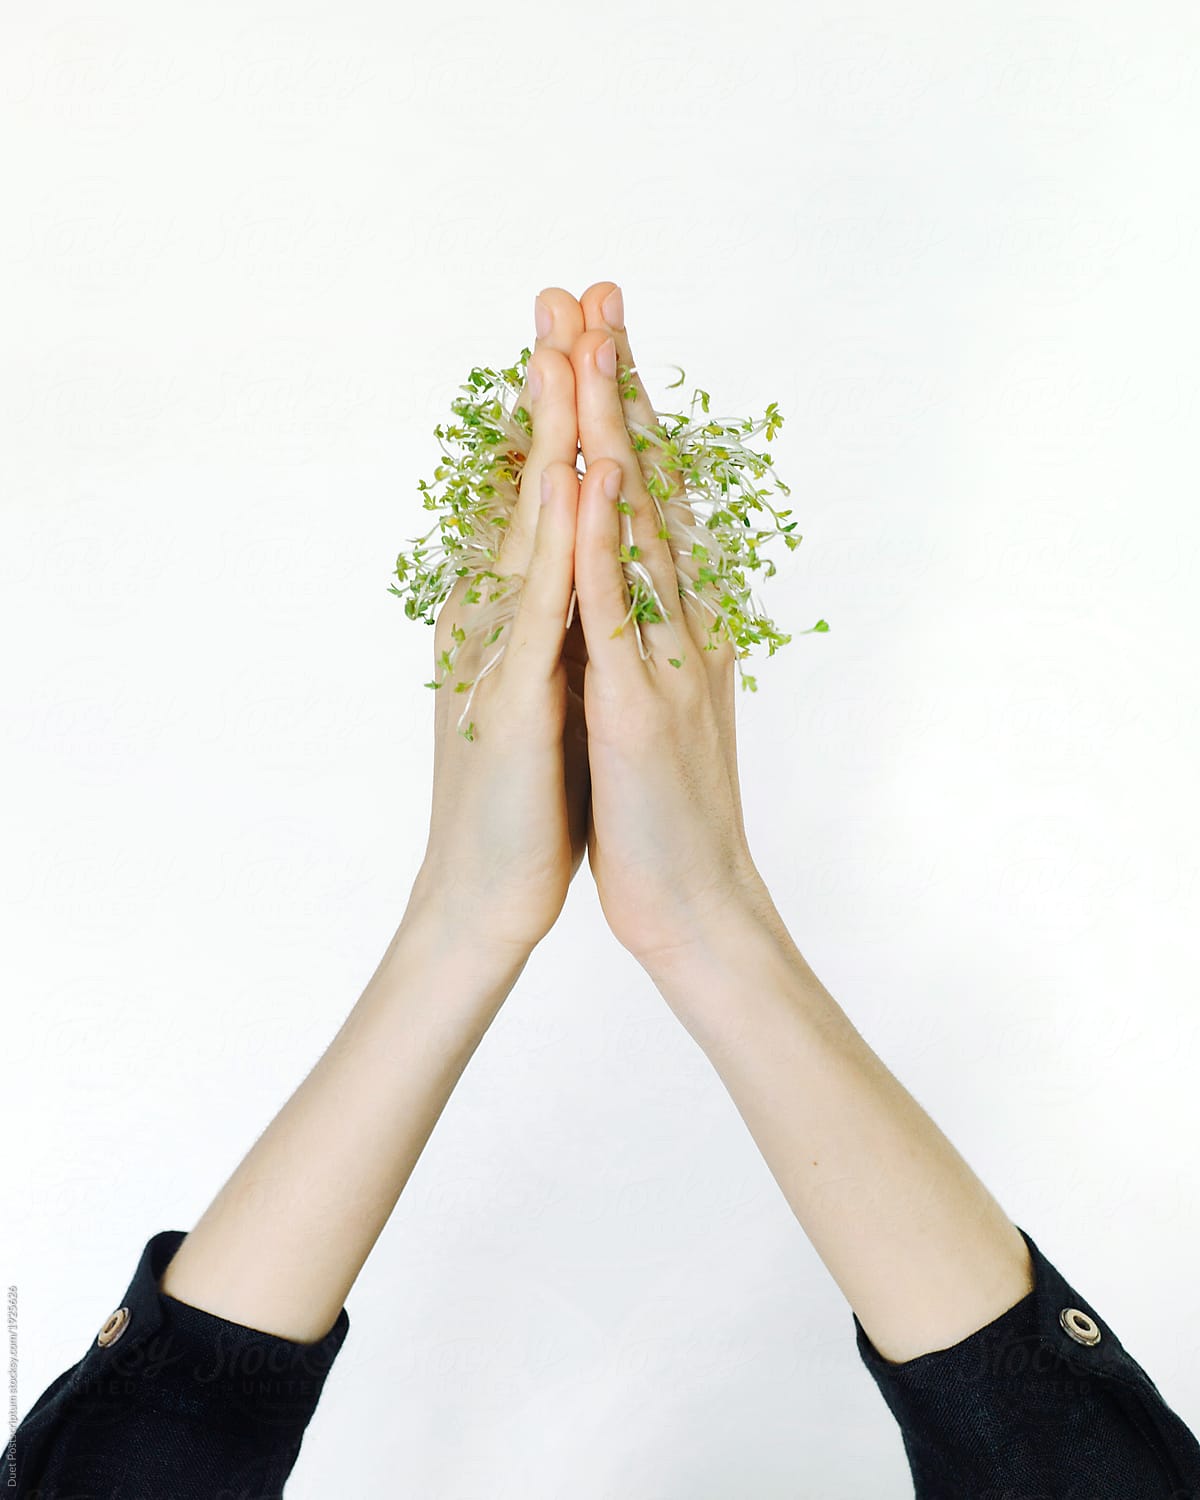 Folded hands with sprouts